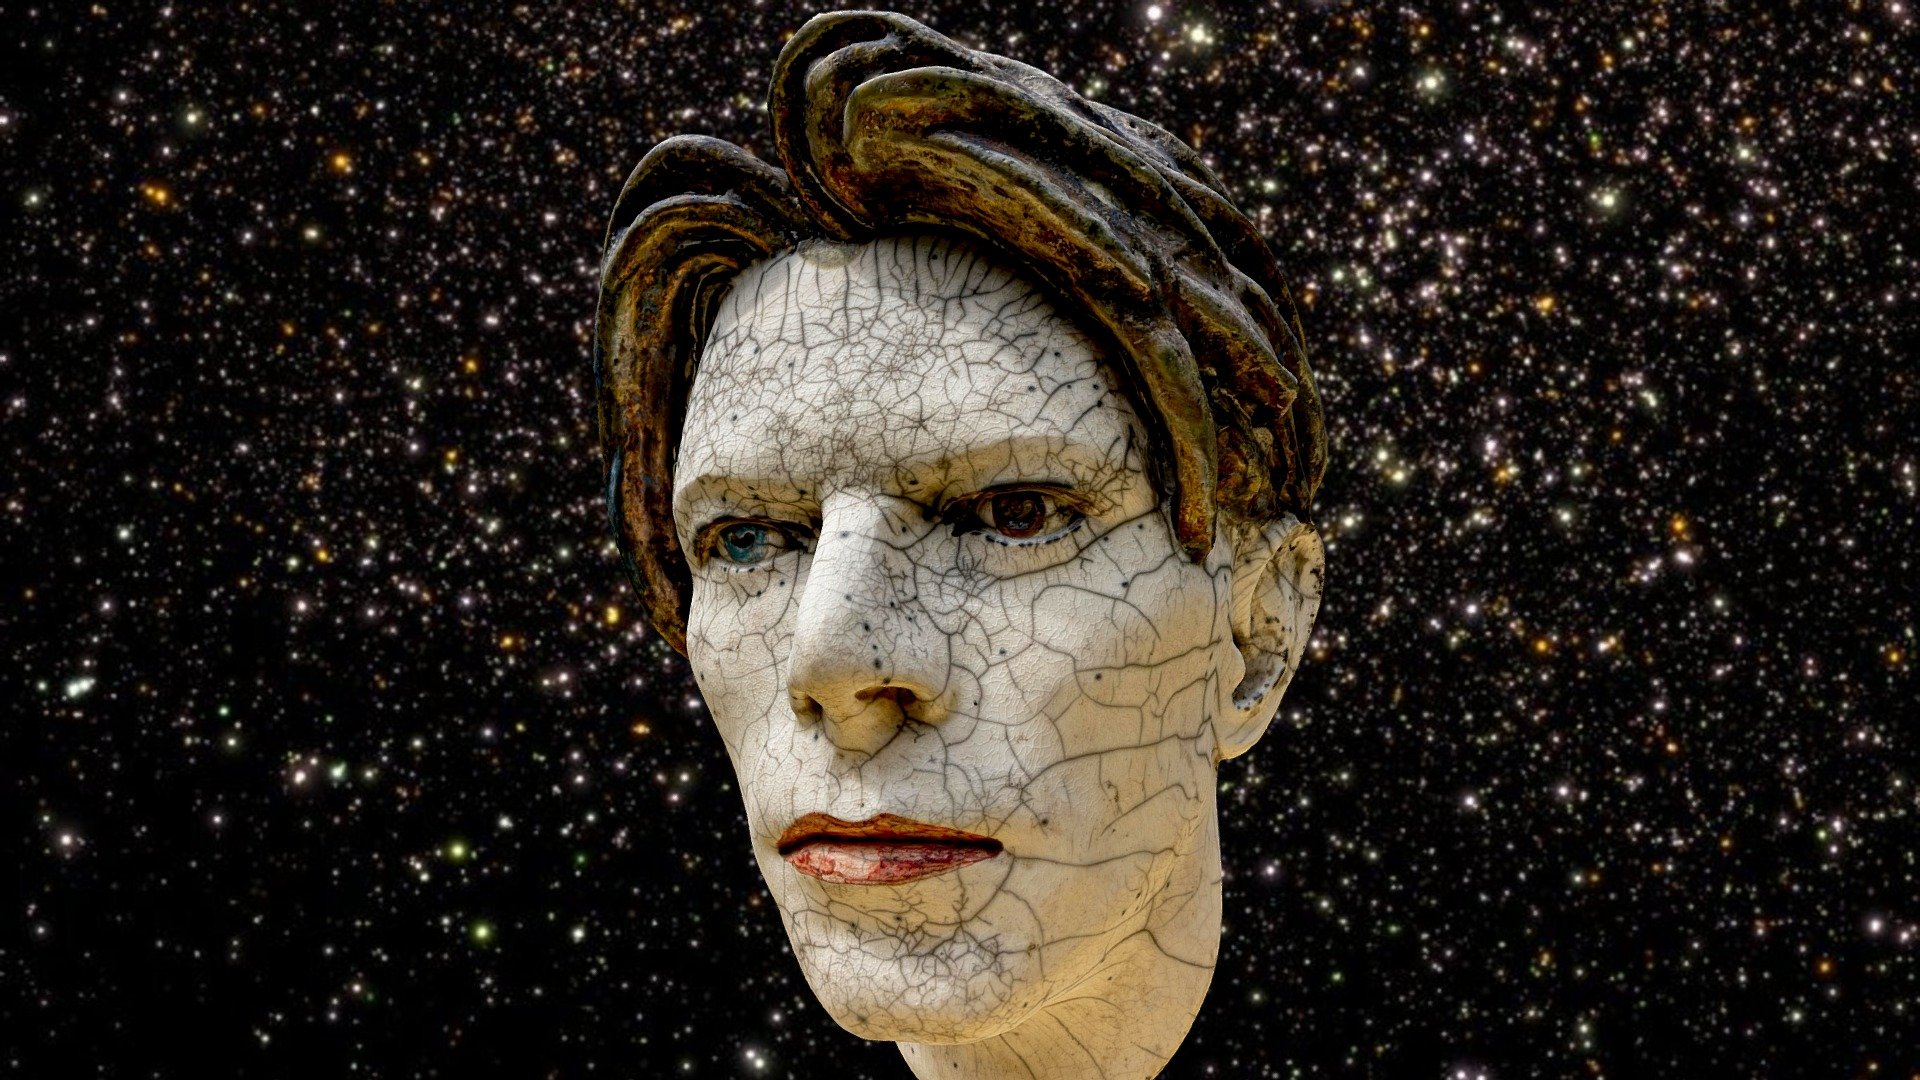 The Man Who Fell To Earth by Maria Primolan